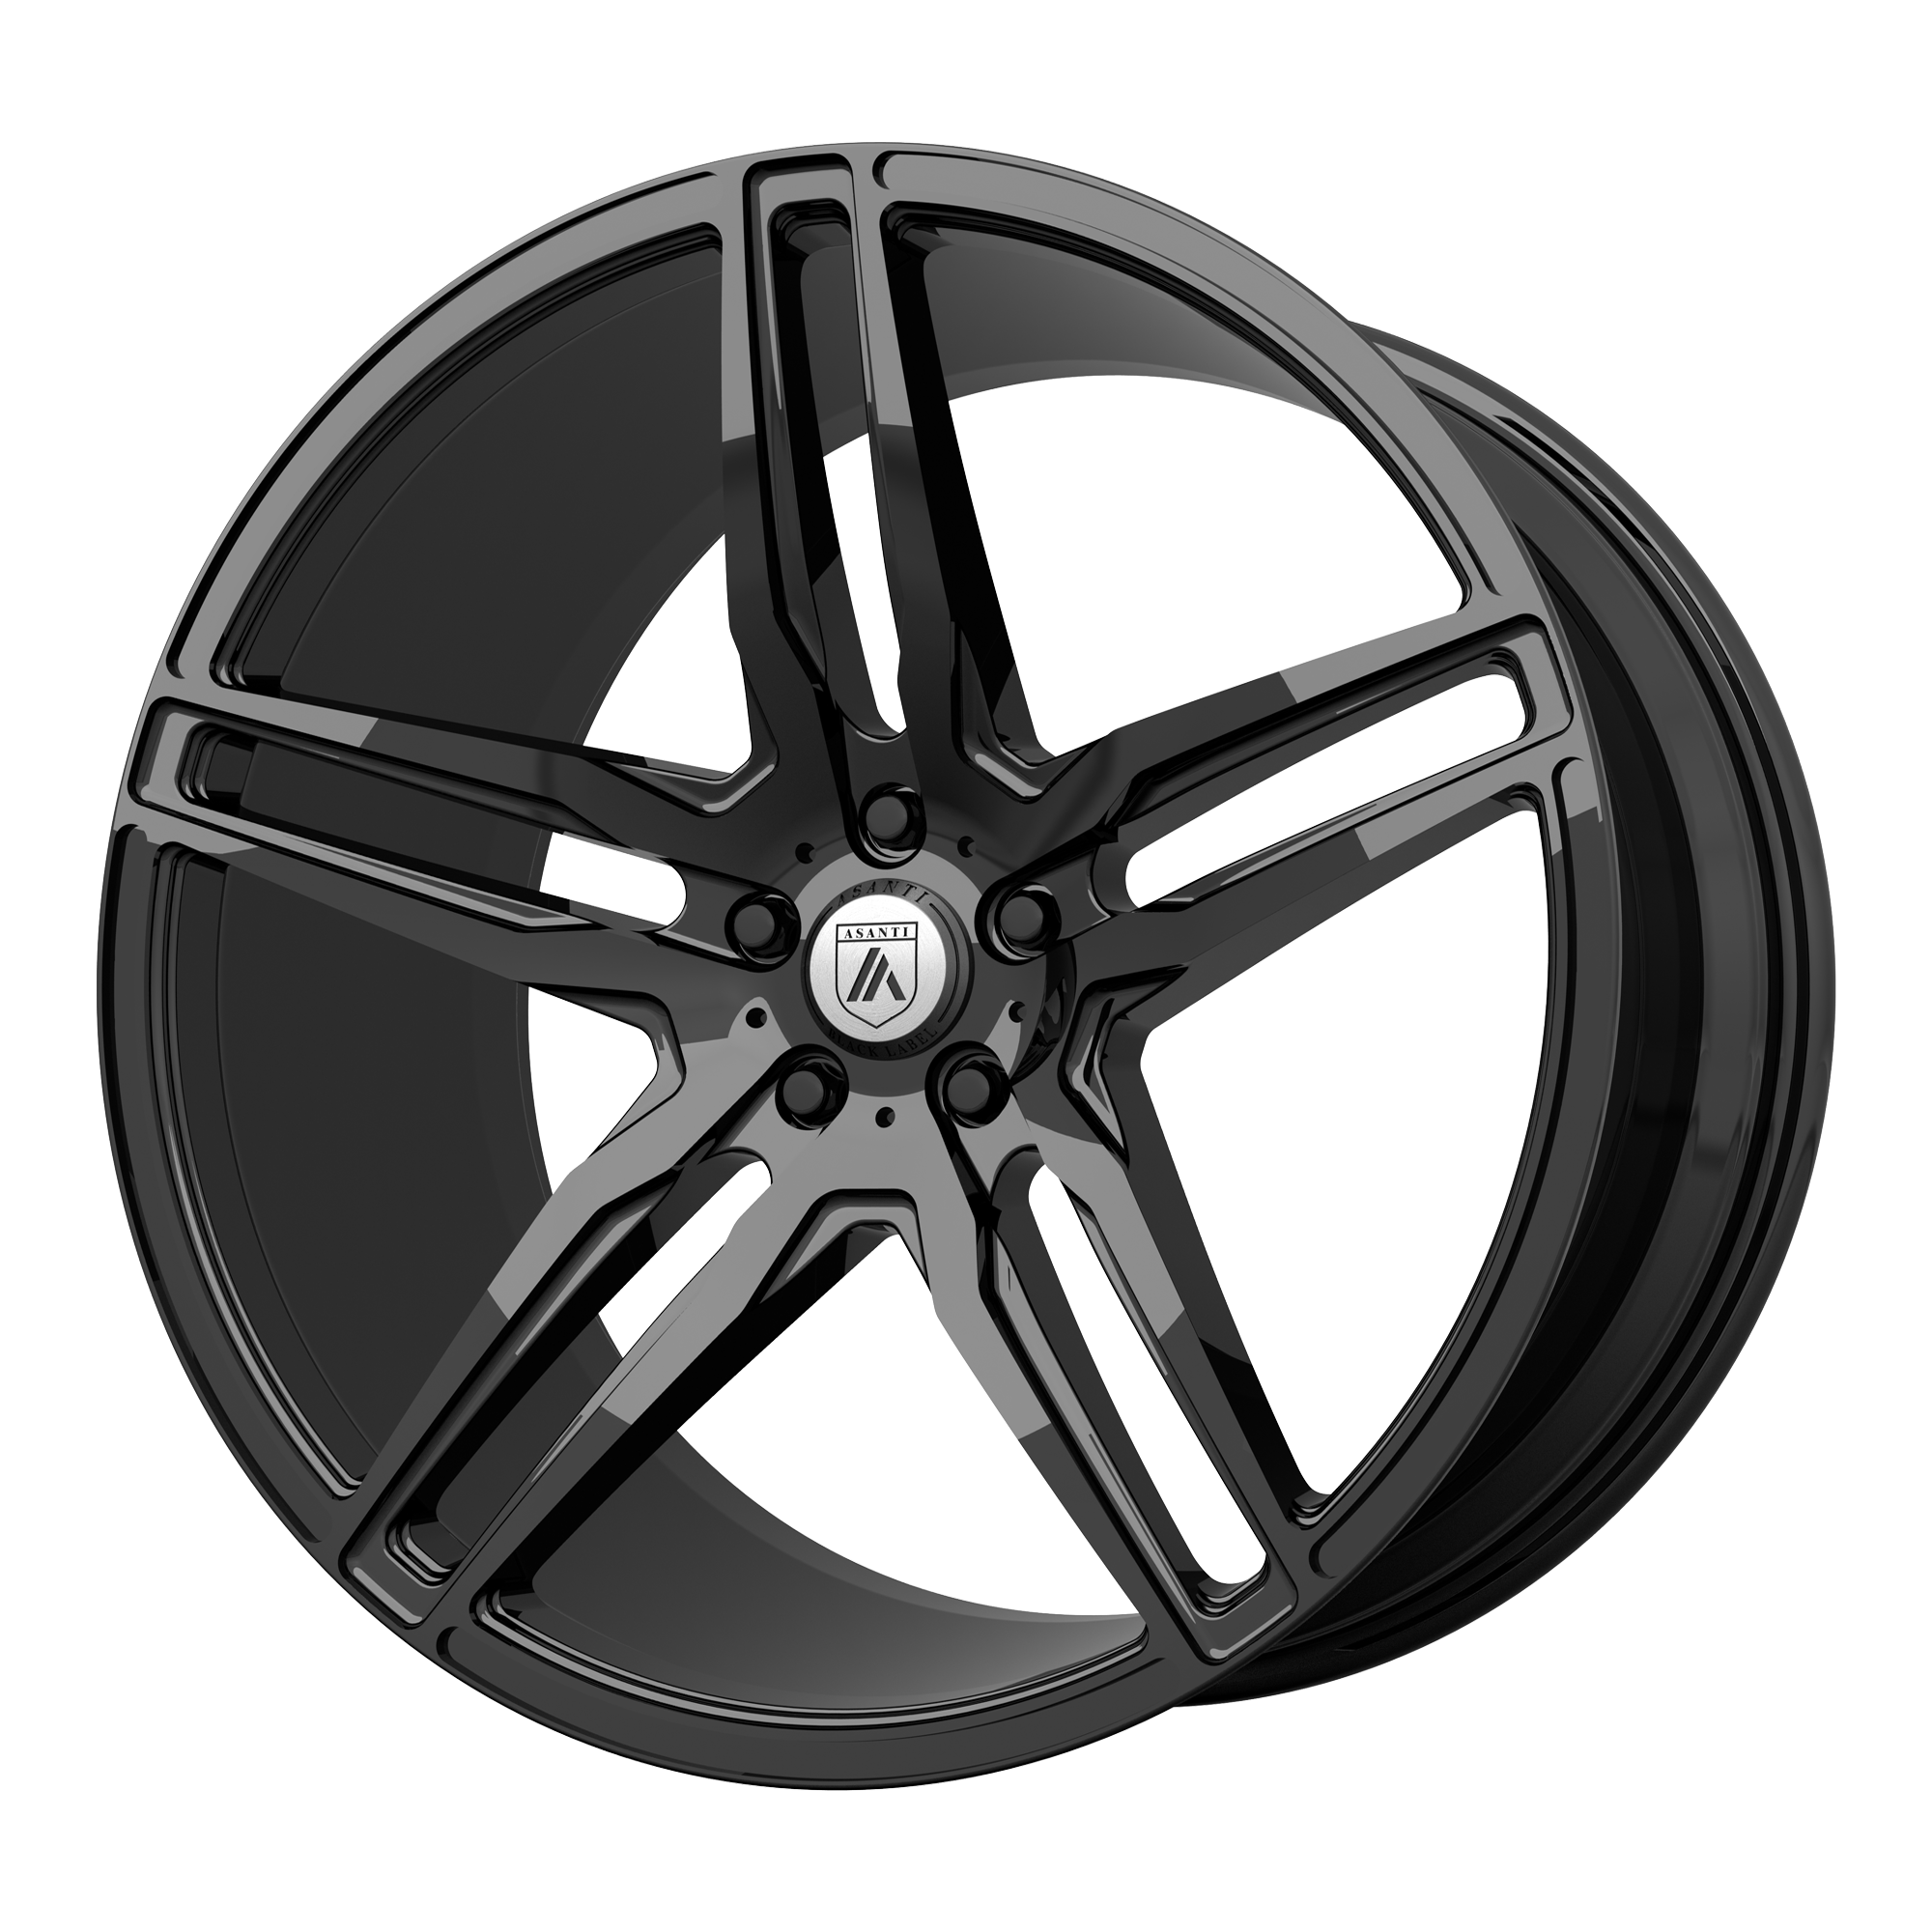 ORION 19x9.5 5x112.00 GLOSS BLACK (45 mm) - Tires and Engine Performance